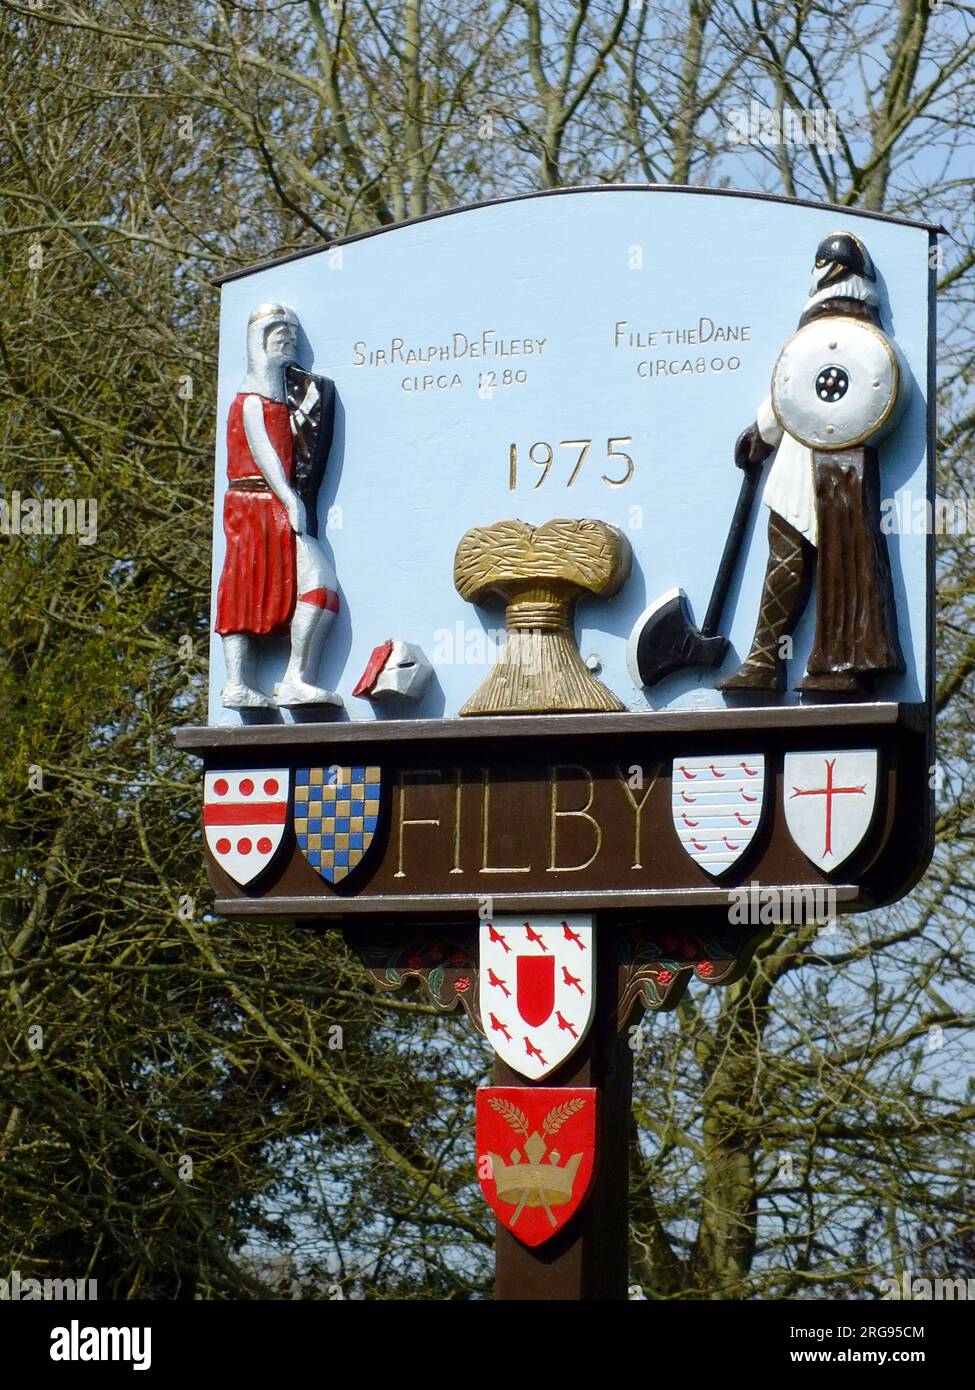 Village sign for Filby, near Great Yarmouth, Norfolk, dated 1975, depicting two historical figures -- File the Dane, who settled in the area around the year 800, and Sir Ralph de Fileby, who lived in the area around 1280. Stock Photo